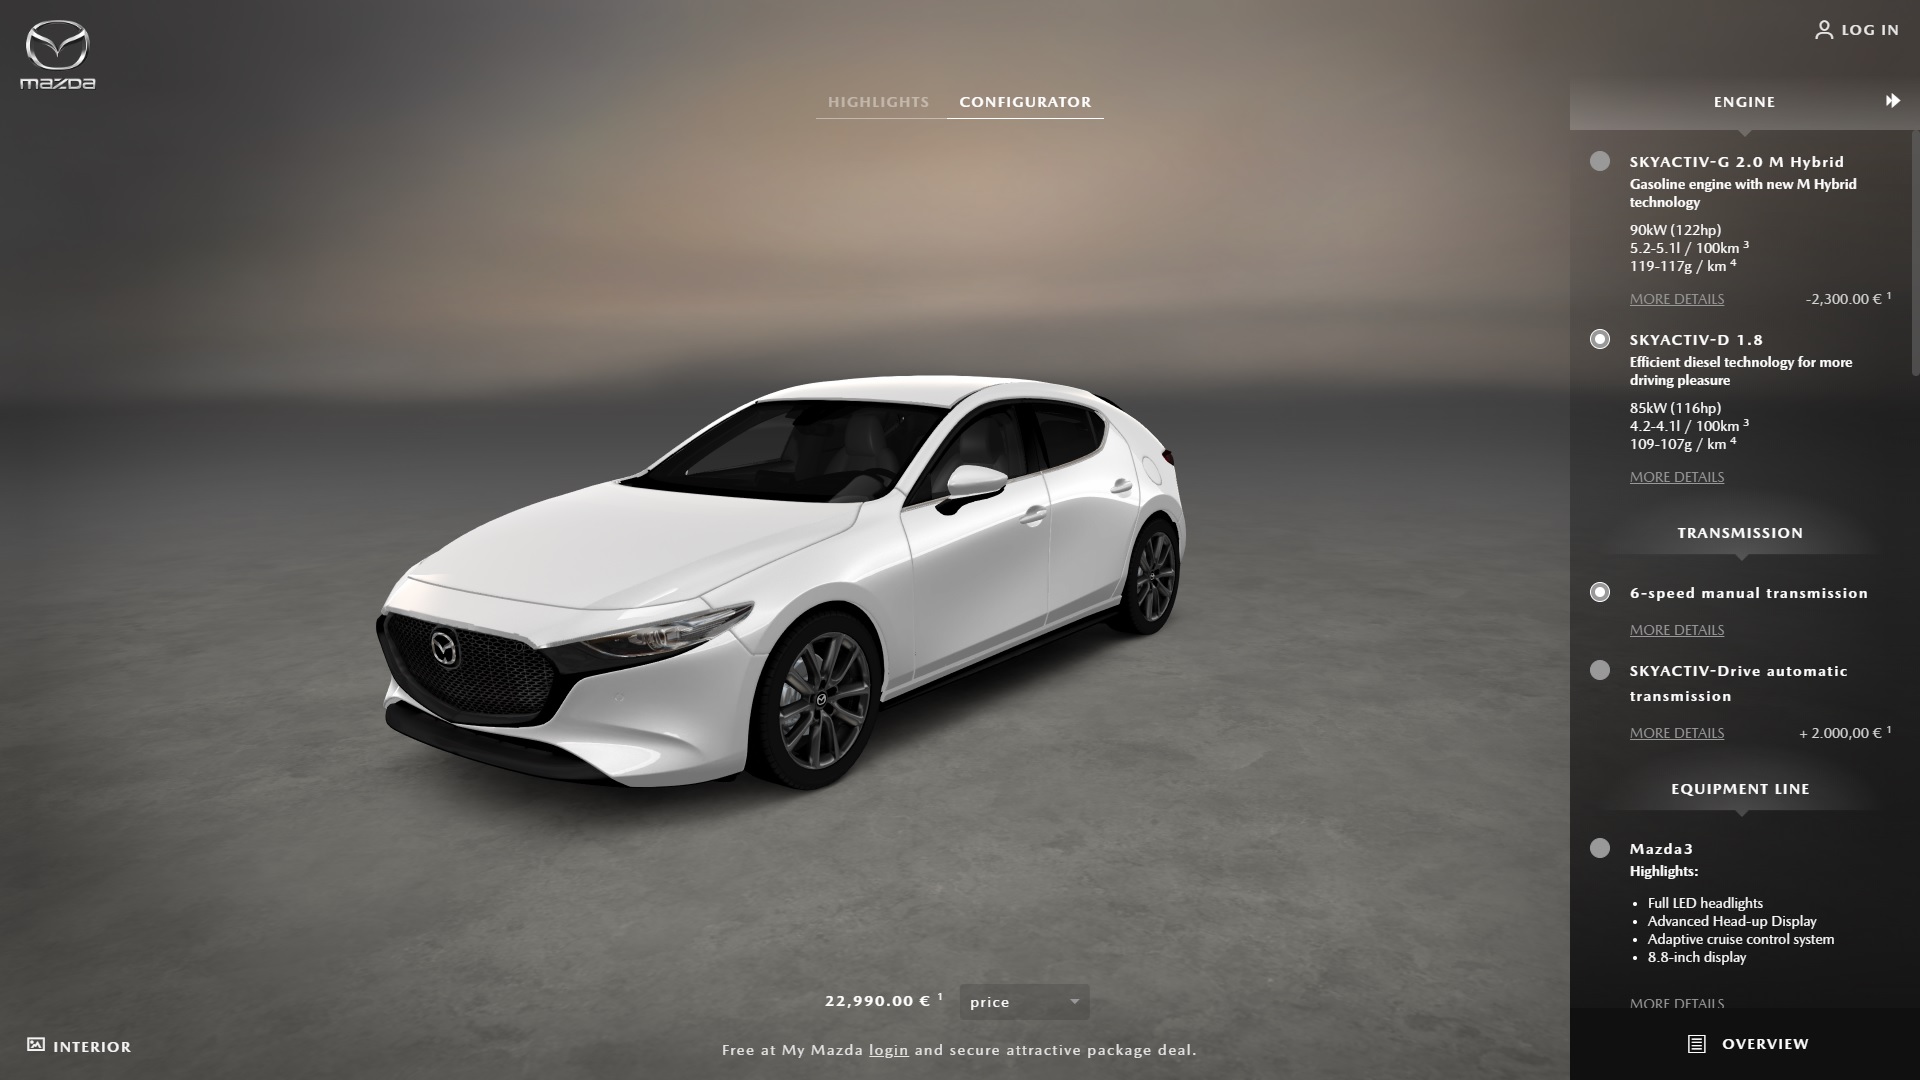 Udseende dusin Vag Build Your Own 2019 Mazda3 With The Official (German) Configurator |  Carscoops